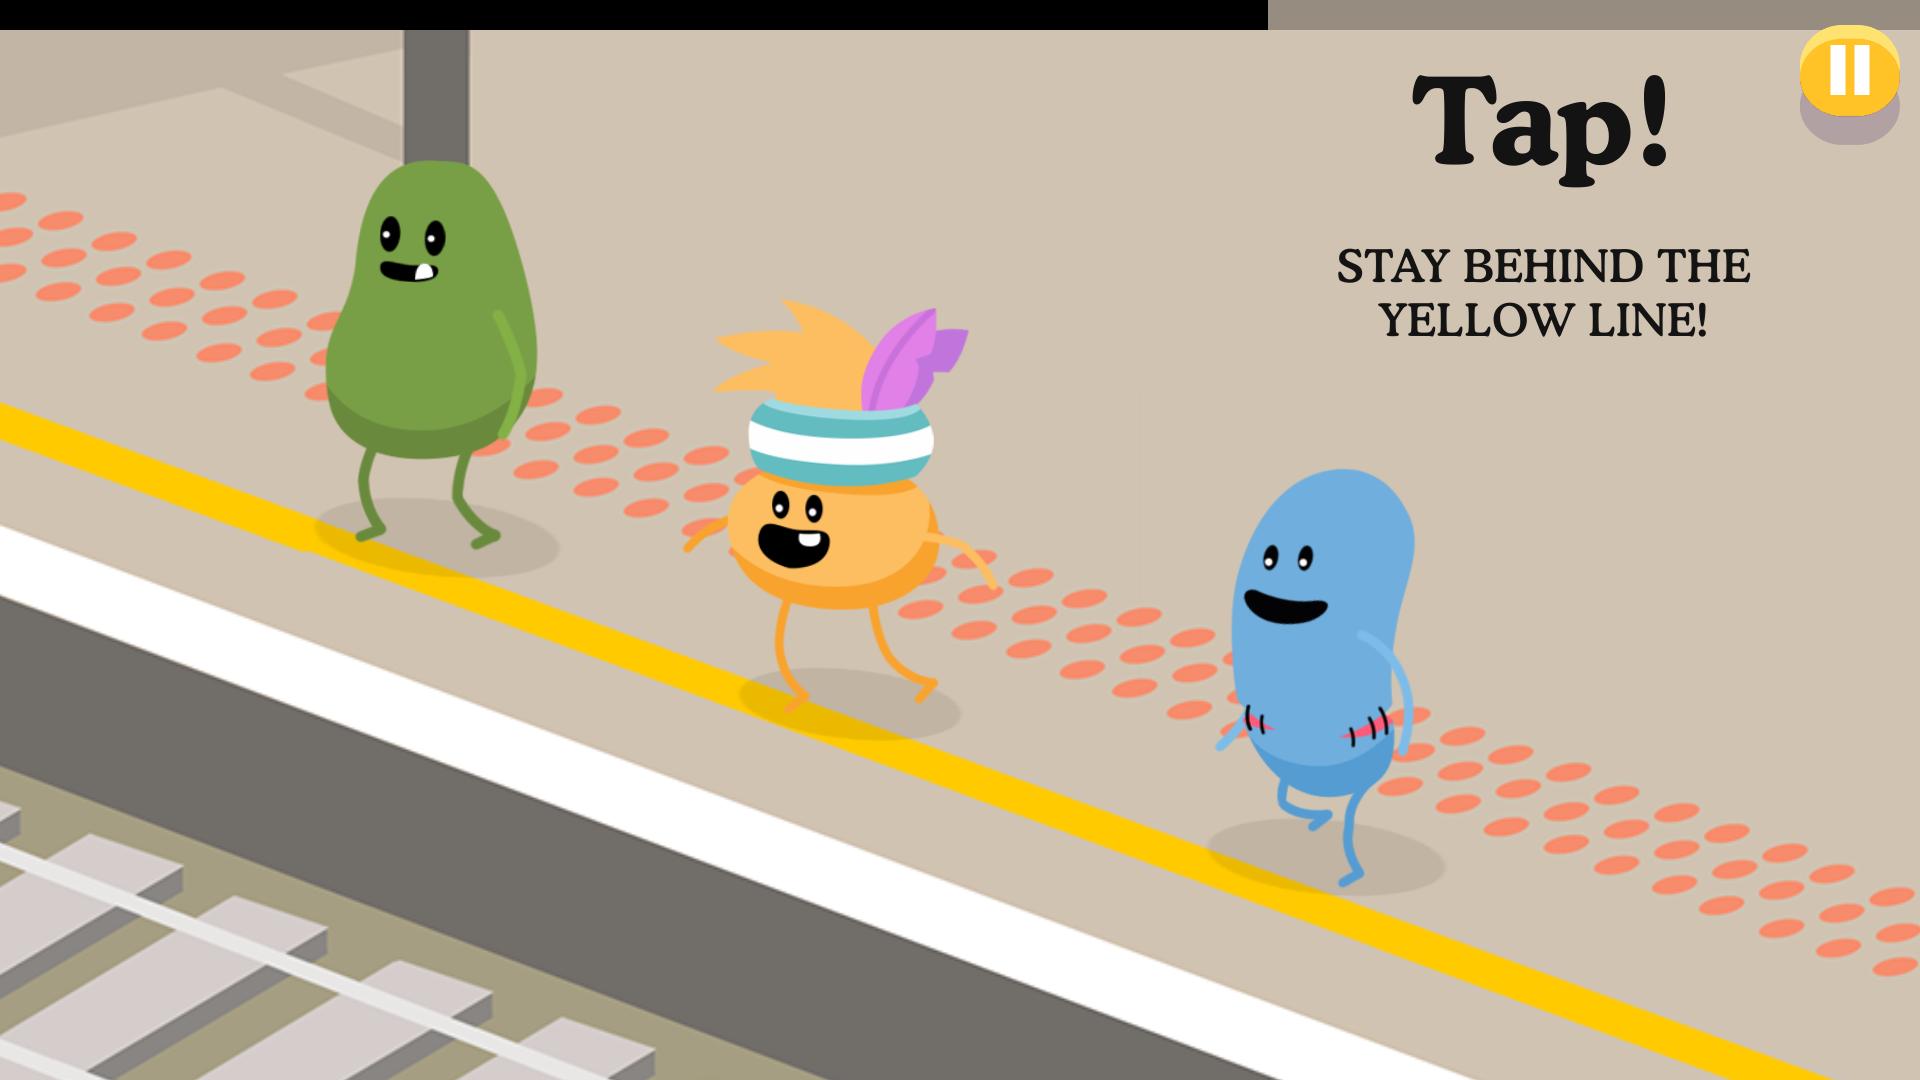 Dumb Ways to Die 2: The Games for Android - APK Download